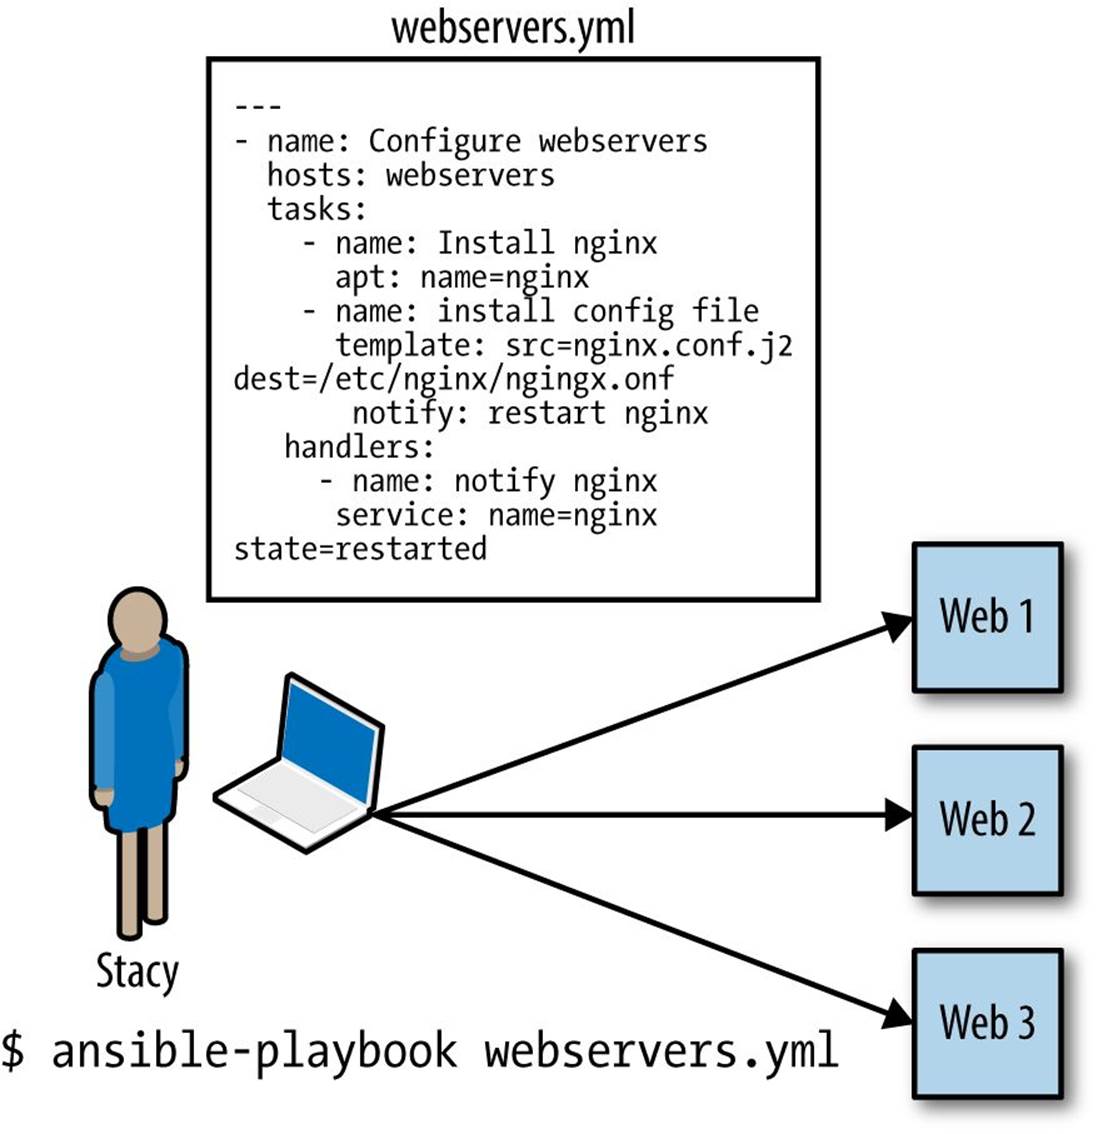 Overview of Ansible behavior